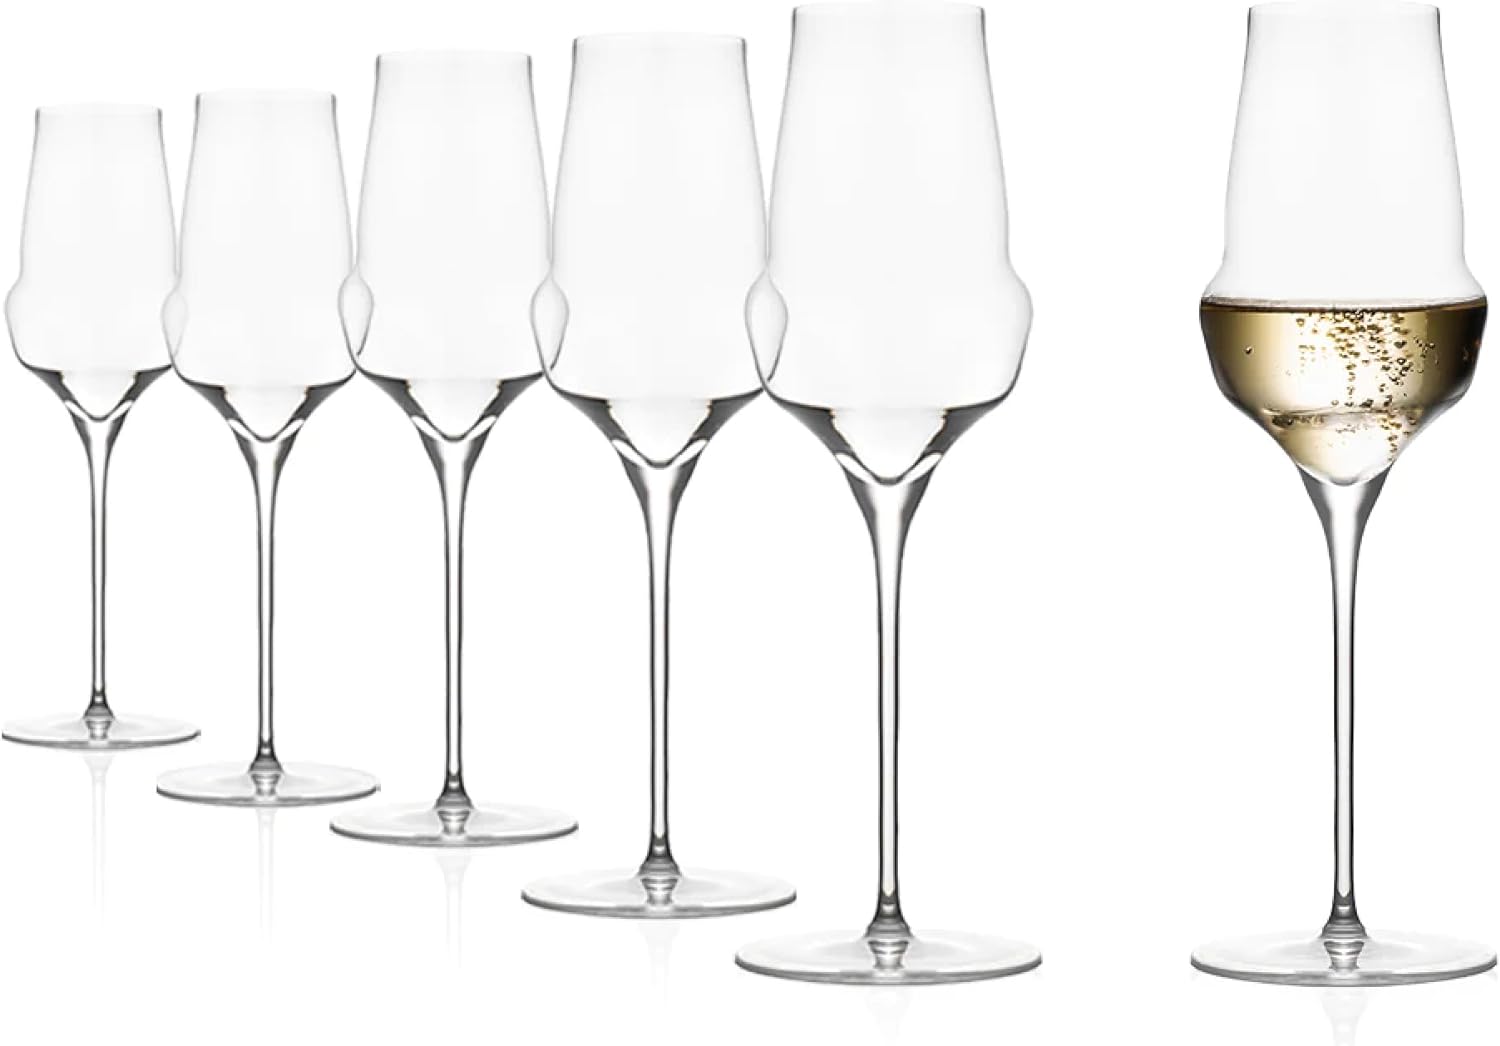 Stölzle Lausitz Champagne Glass Cocoon/Elegant Champagne Glasses Set of 6/High-Quality Champagne Glasses Made of Crystal Glass/Aperitif Glasses/Prosecco Glasses Extravagant/Champagne Flood Glass